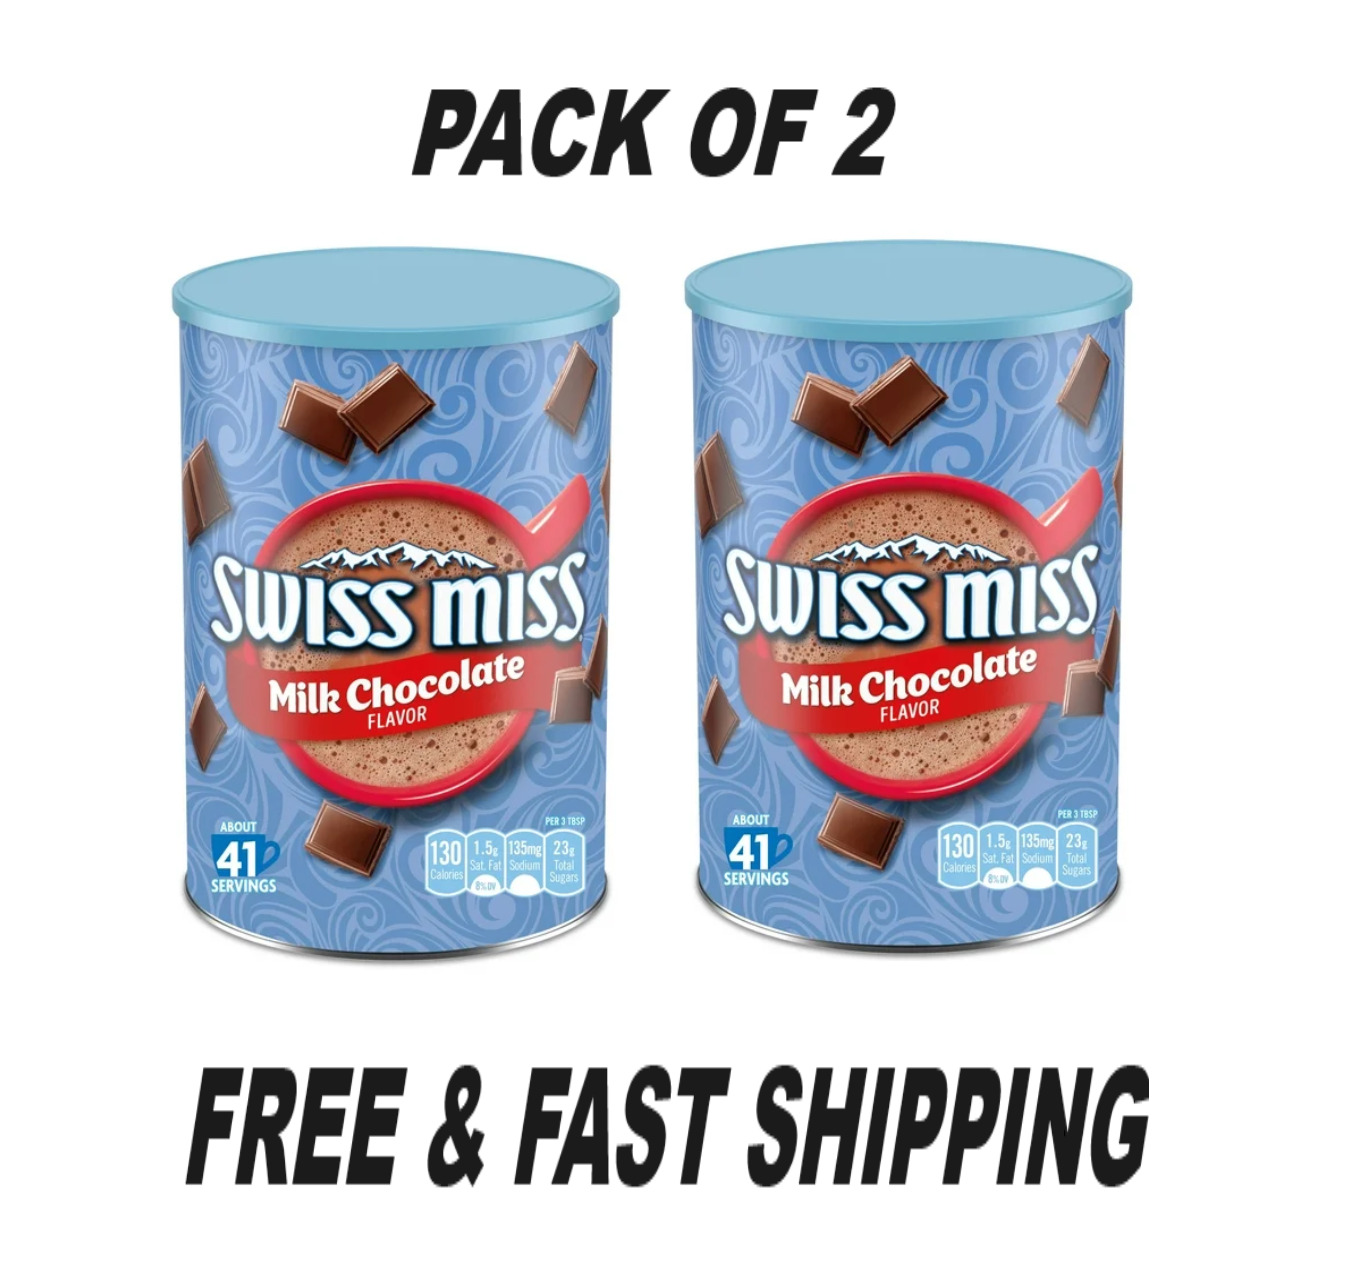 Swiss Miss Milk Chocolate Flavored Hot Cocoa Mix, 45.68 oz. Canister